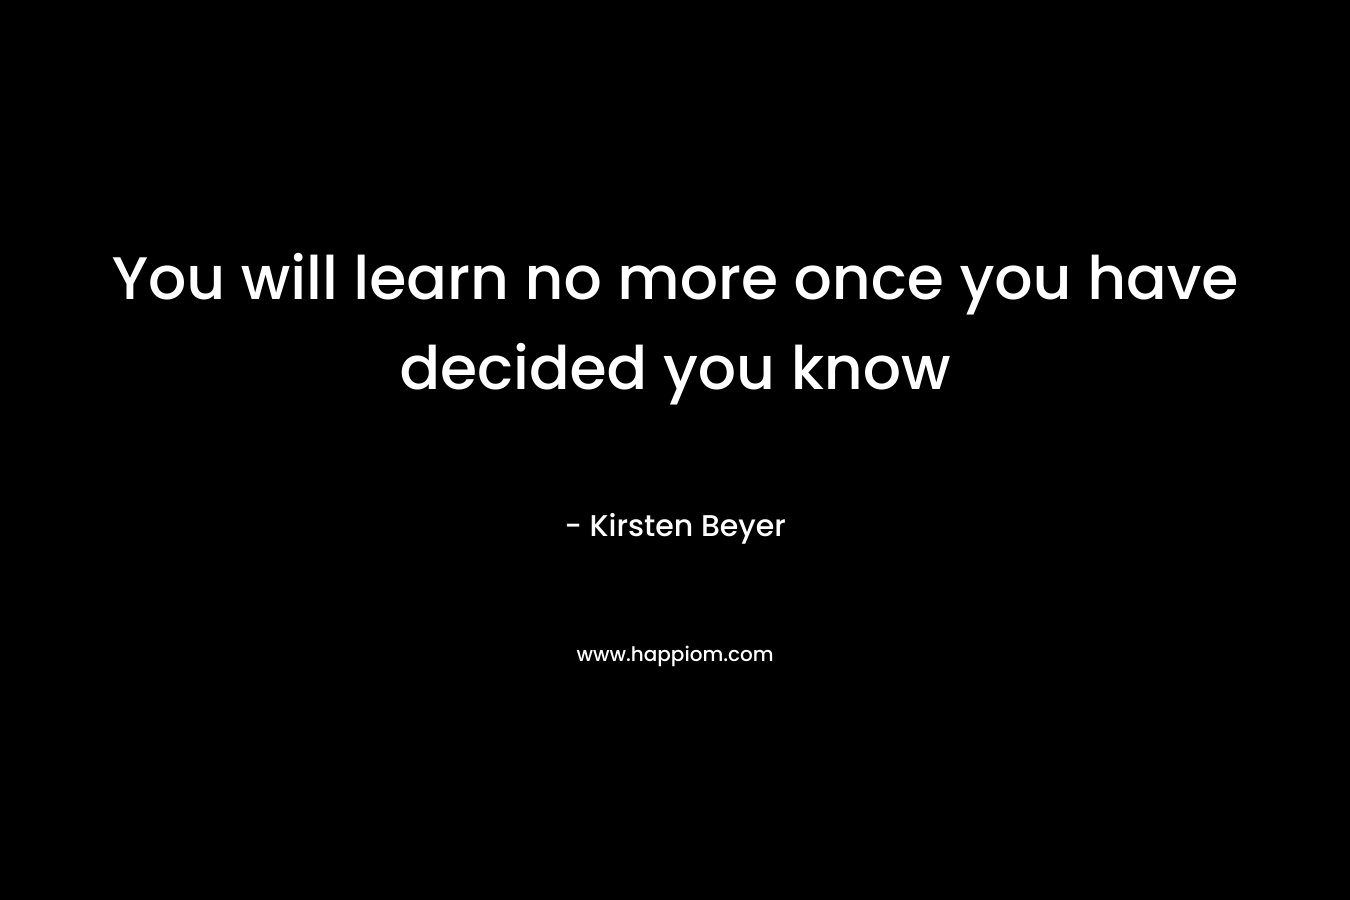 You will learn no more once you have decided you know – Kirsten Beyer